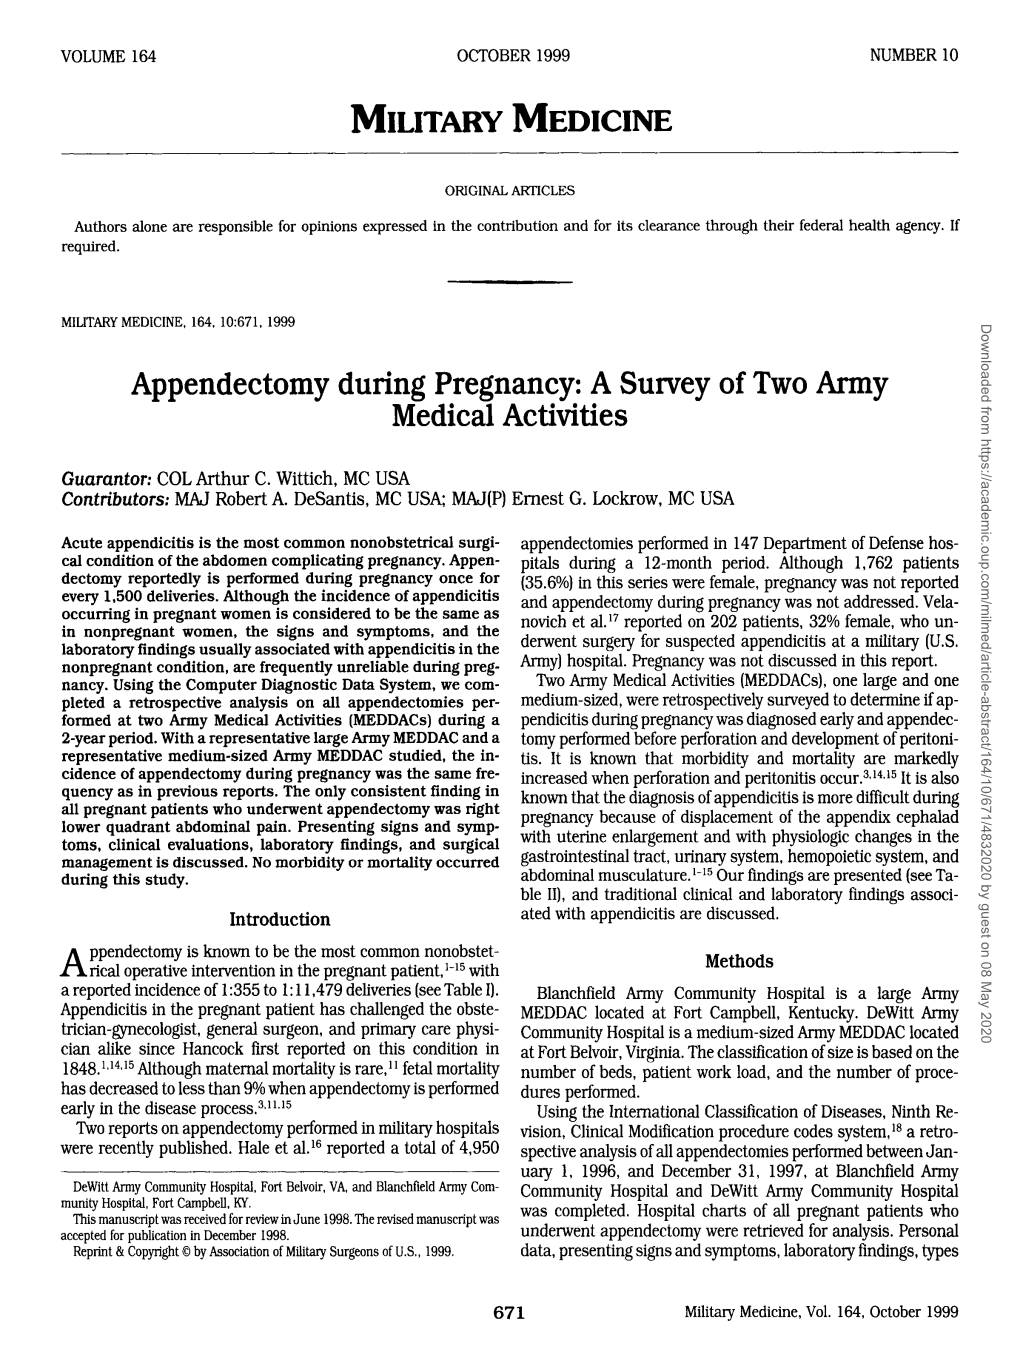 Appendectomy During Pregnancy: a Survey of Two Army Medical Activities